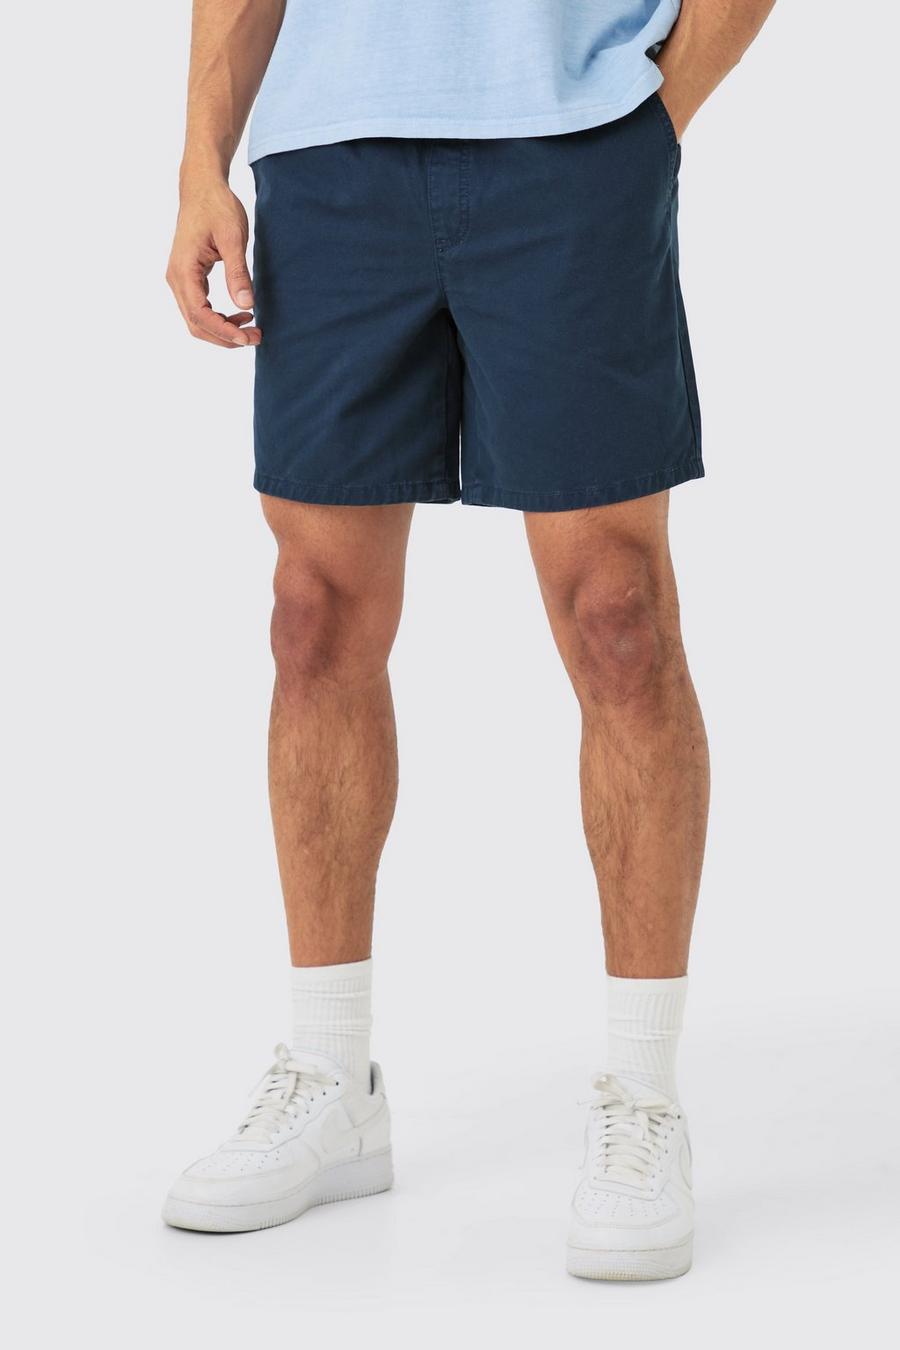 Shorter Length Relaxed Fit Elastic Waist Chino Shorts in Navy image number 1